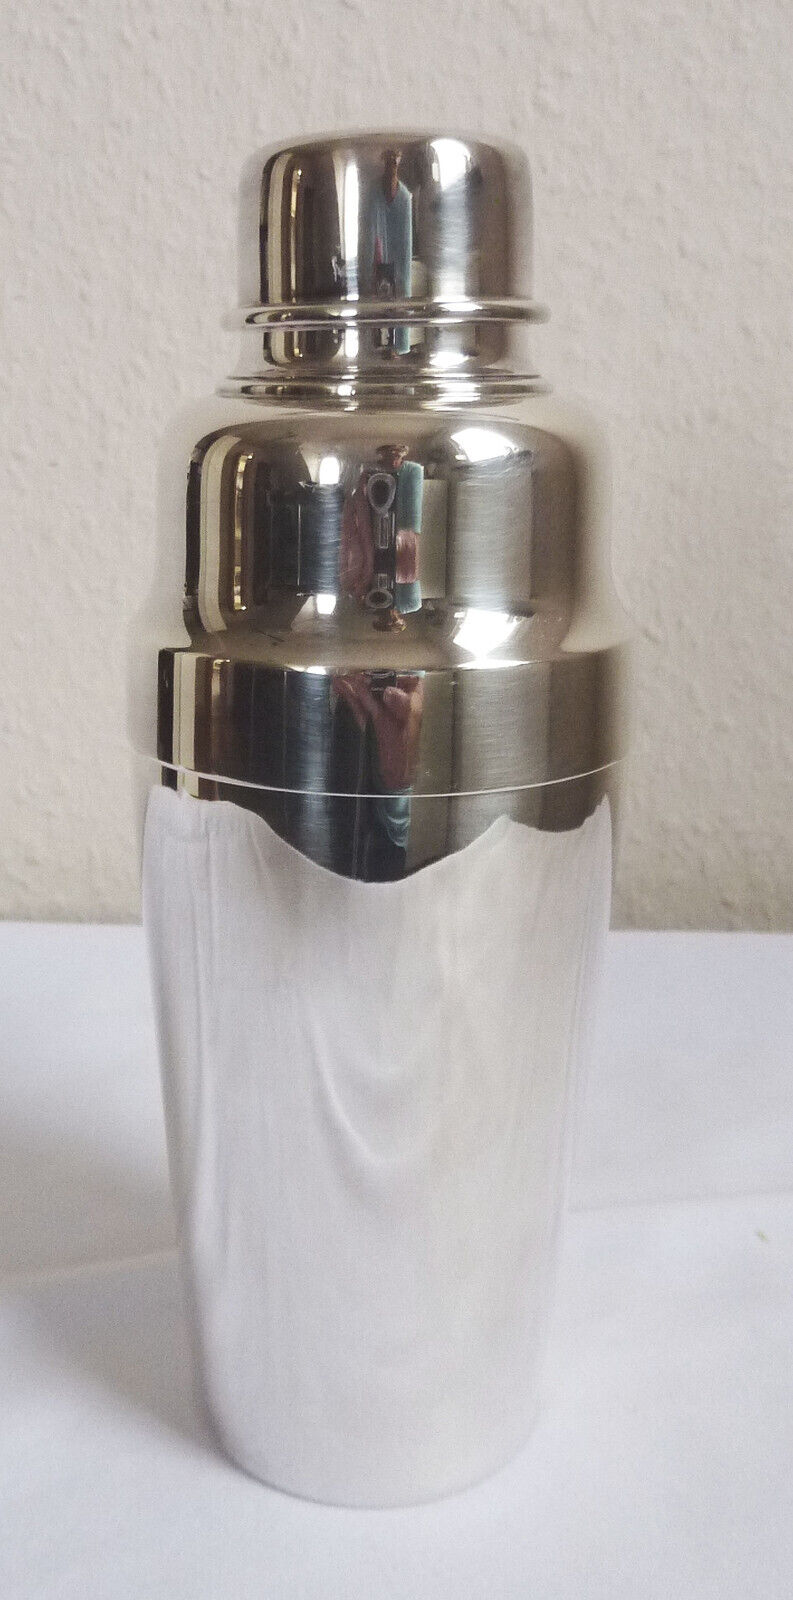 Superb French ART DECO Cocktail Shaker Christofle silverplated in mint condition